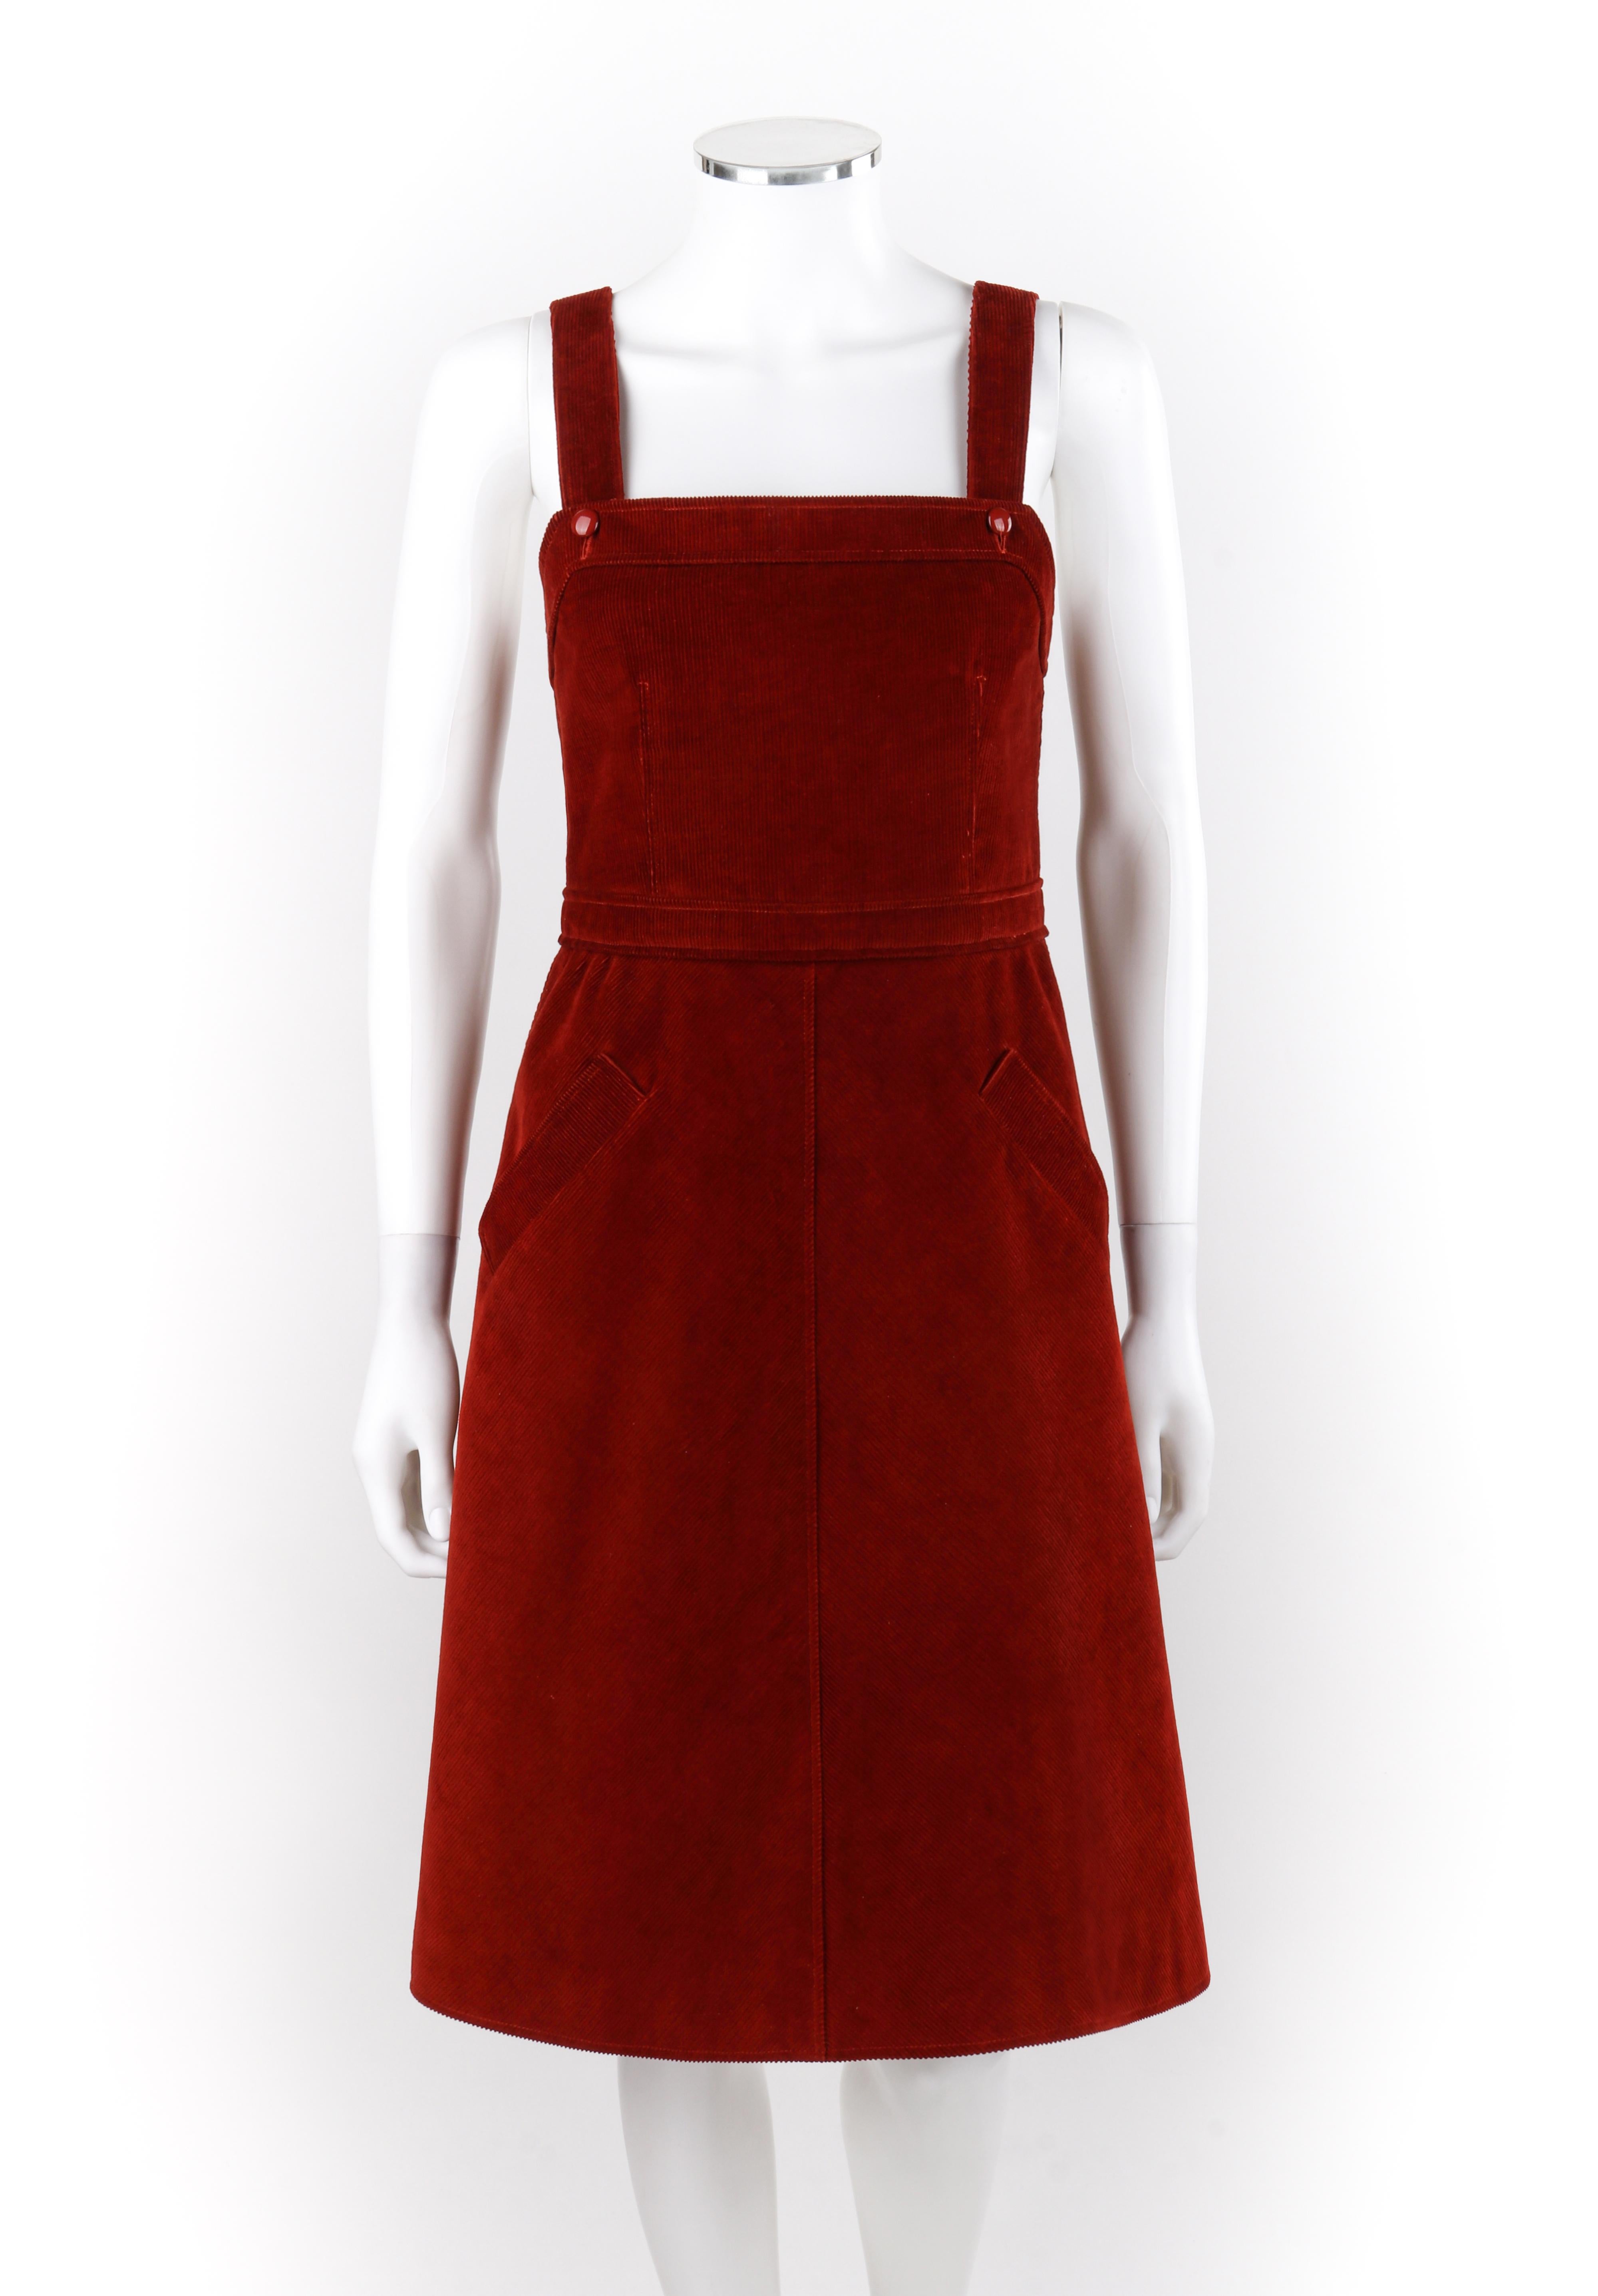 COURREGES c.1970's Hyperbole Blood Red Corduroy Sleeveless A-Line Jumper Dress
Circa: 1970s
Label(s): Courreges Hyperbole
Designer: Andre Courreges
Style: Jumper dress
Color(s): Red
Lined: Yes
Marked Fabric Content: Shell: “100% Cotton”; Lining: